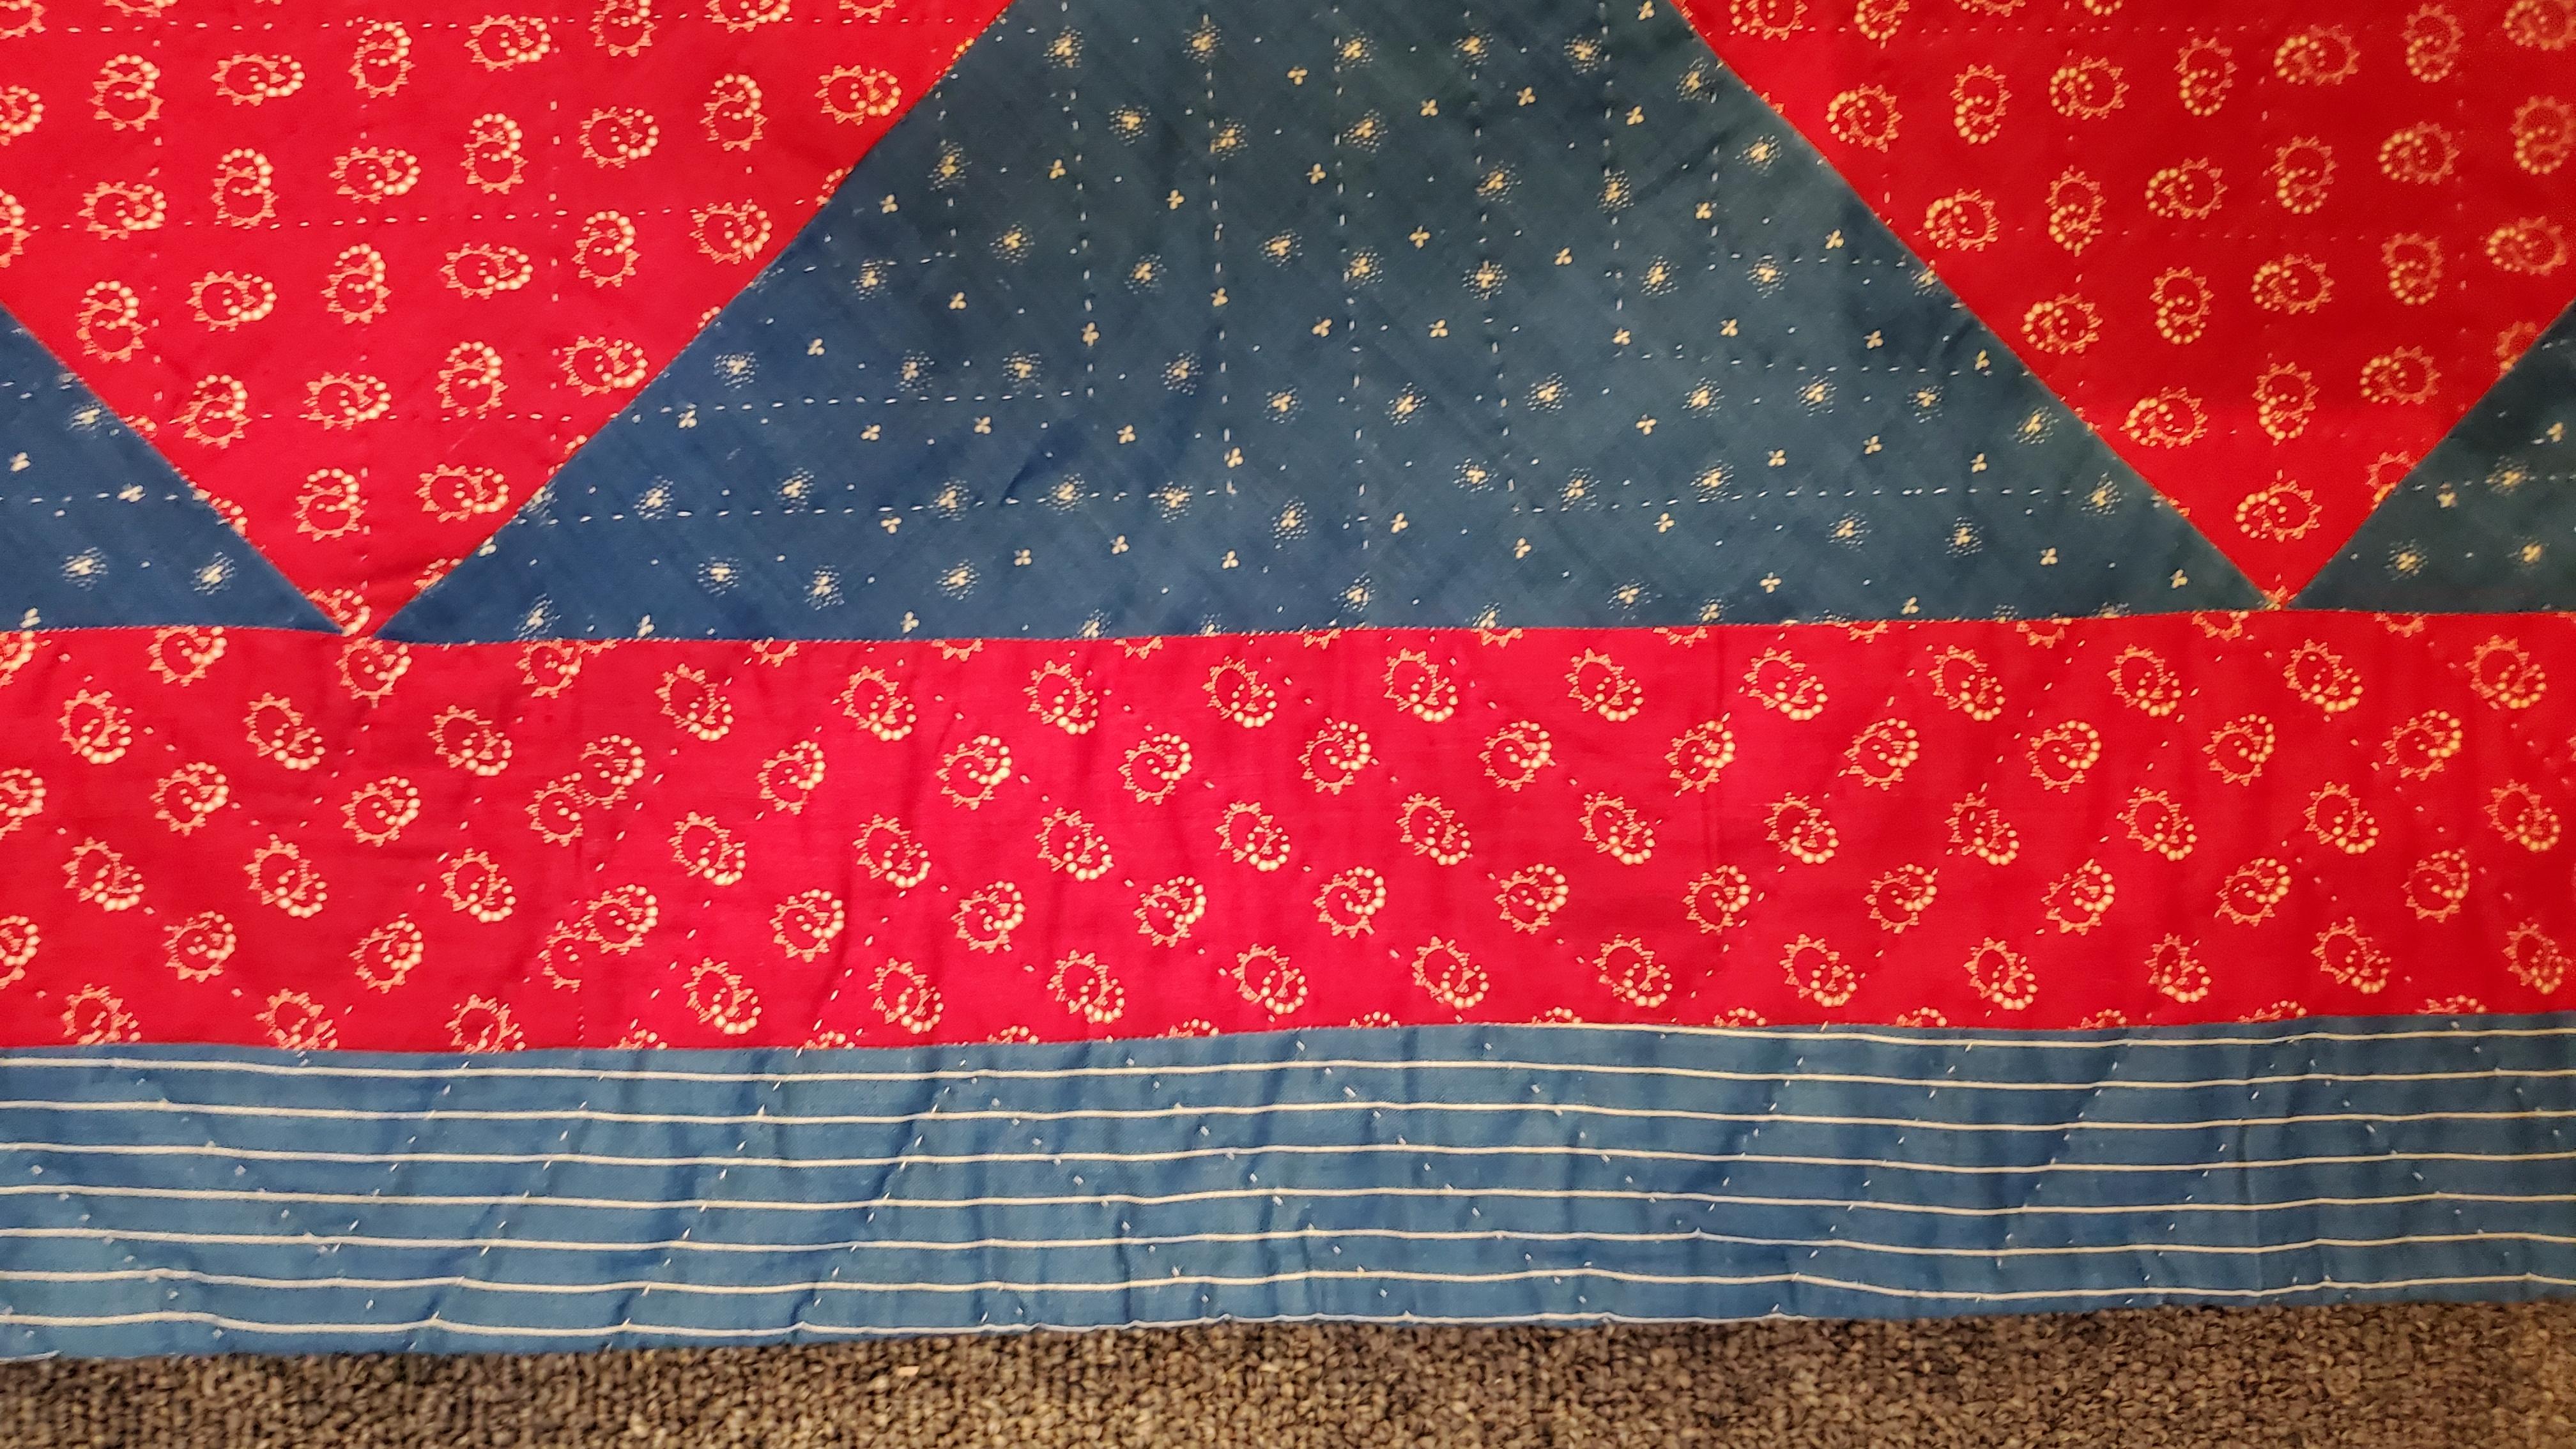 Hand-Crafted 19Thc Red & Blue Calico Blocks Quilt For Sale